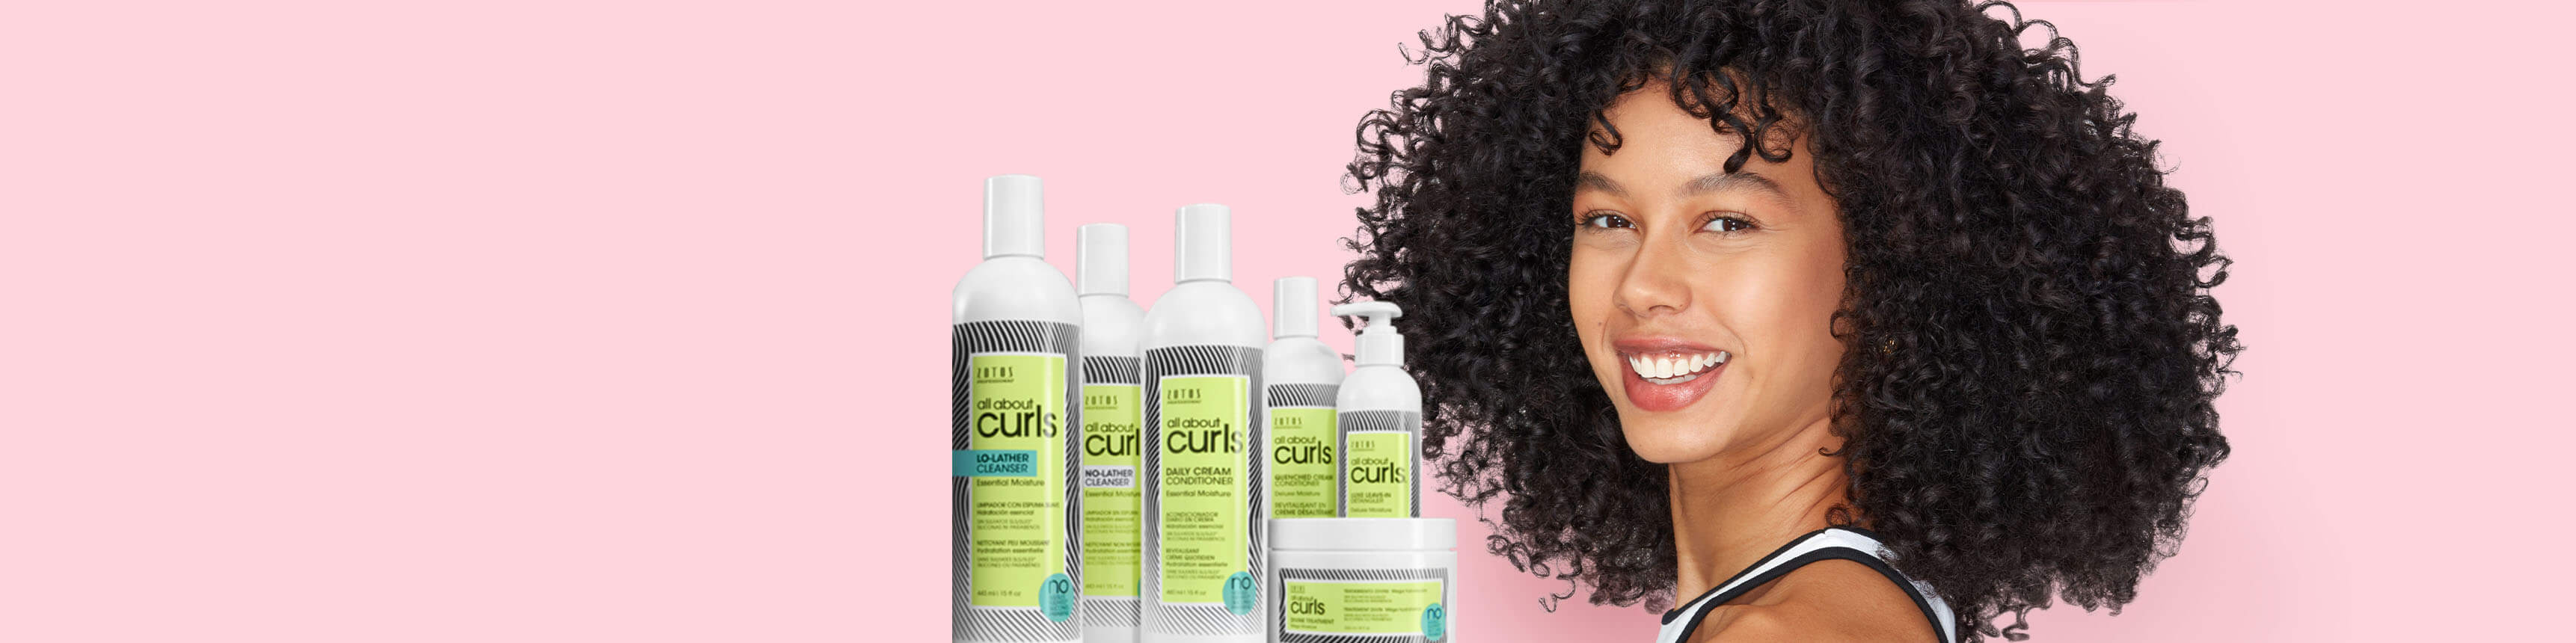 Curly hair model with products on pink background